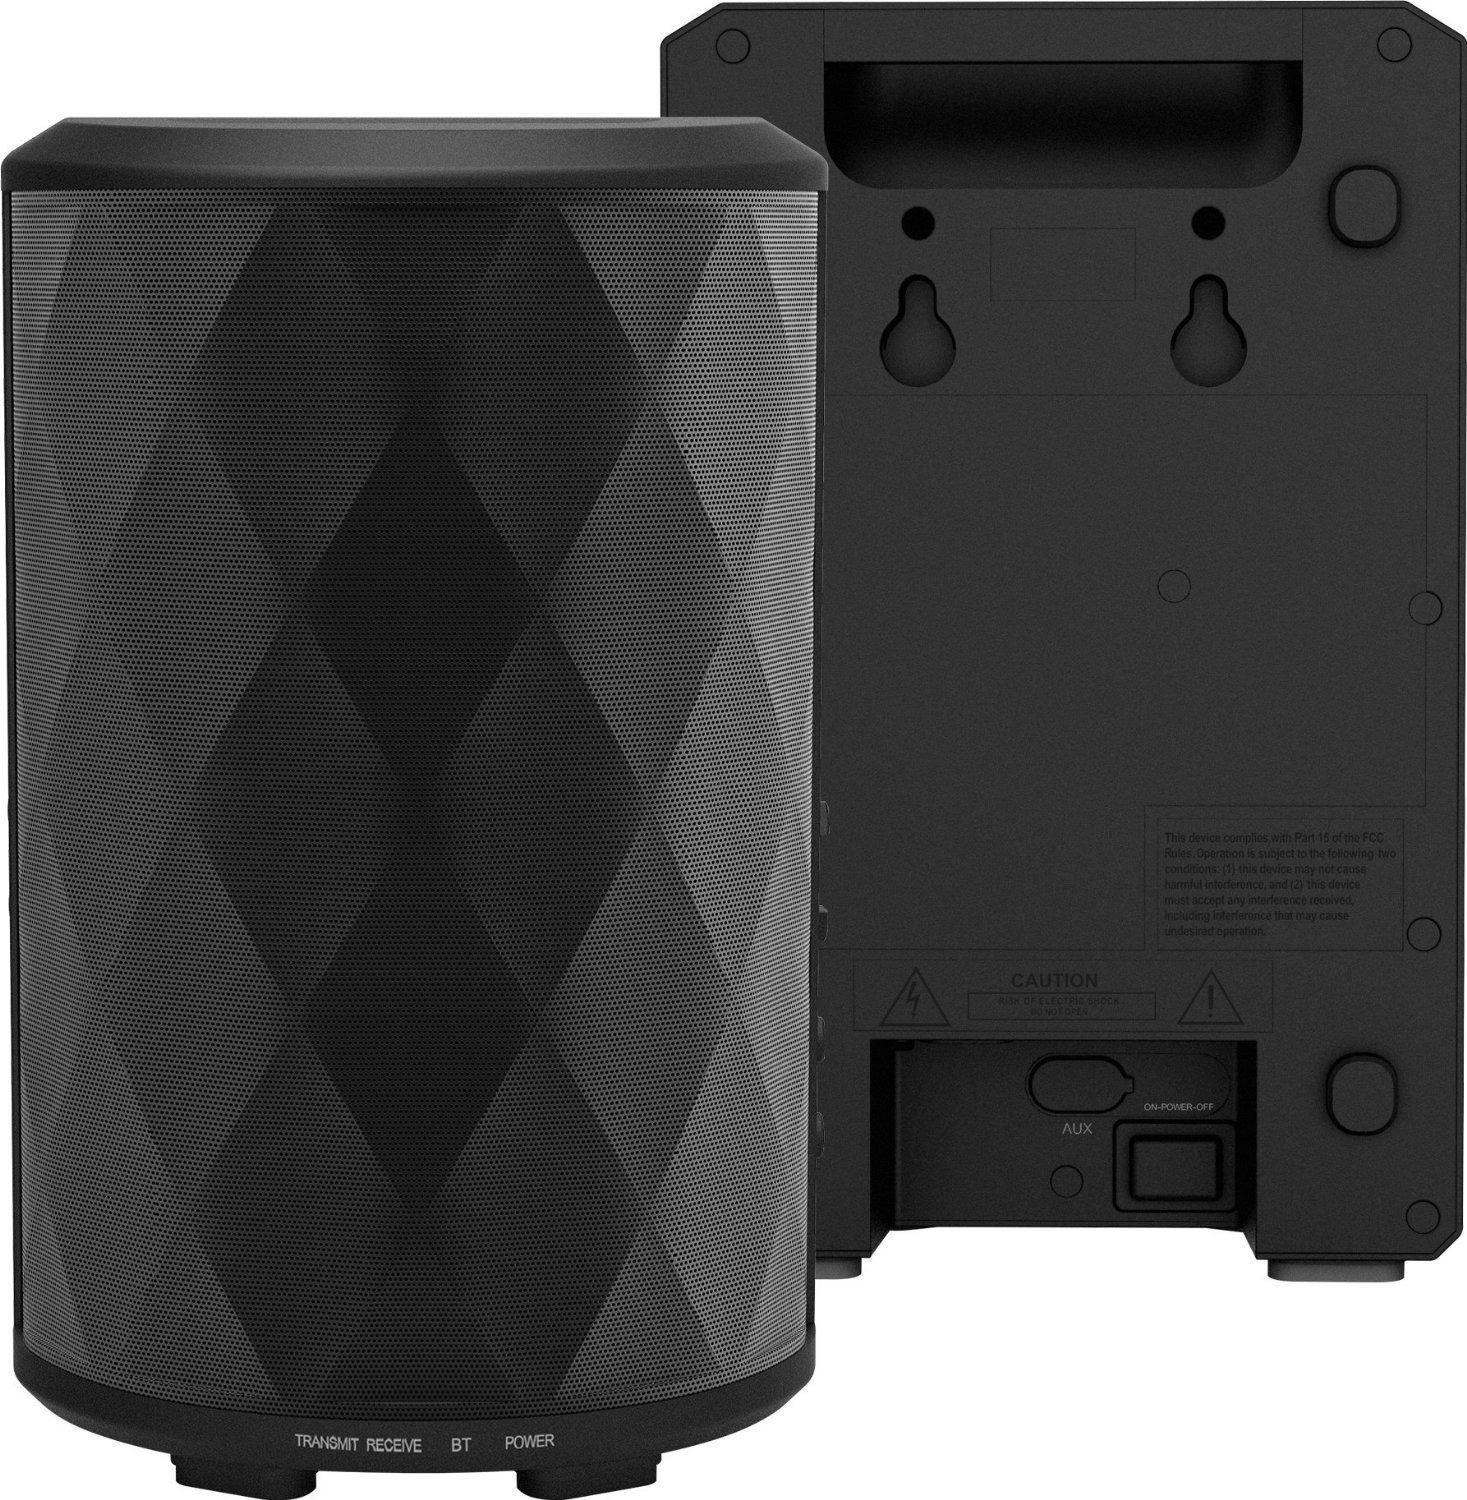 Monster Indoor / Outdoor Wireless Speaker 40W High Performance Indoor/Outdoor Bluetooth Speakers, EZ-Play (Expandable up to 8 Speakers), Water Resistant, and Wall Mountable (Two Speakers Included) - image 2 of 2